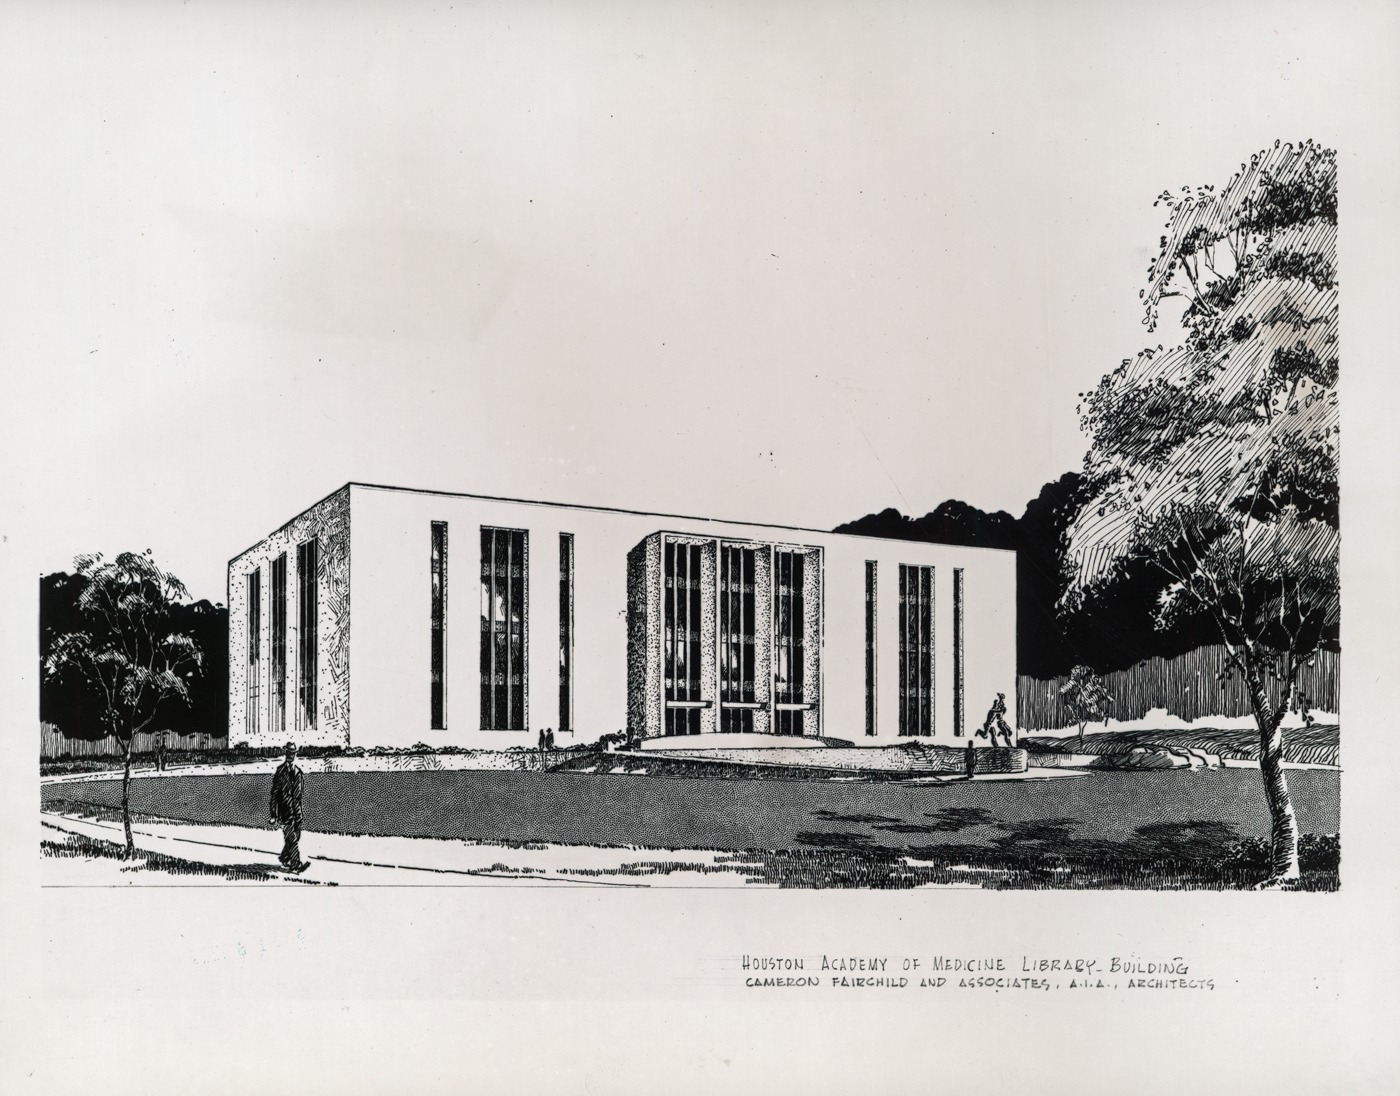 Houston Academy of Medicine Library Building architectural drawing, 1952